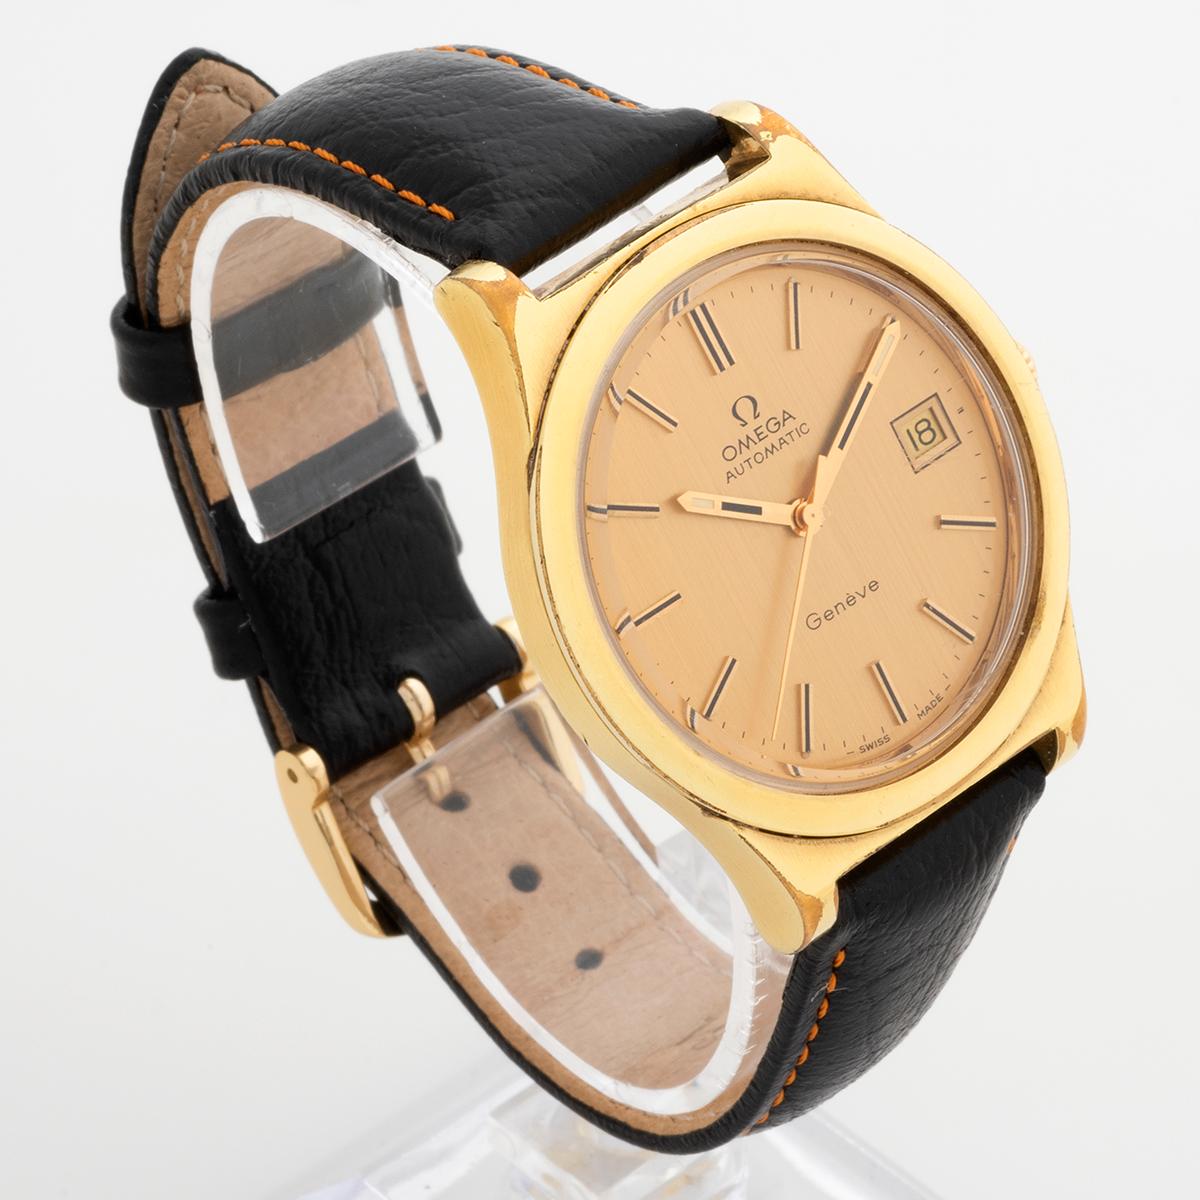 Our vintage Omega Geneve automatic features a 36mm gold capped case with gold tone dial and black indices. A larger than average for its era, this retro Omega dates from c.1974 with a XXXXX serial number and is fitted to a quality leather strap with